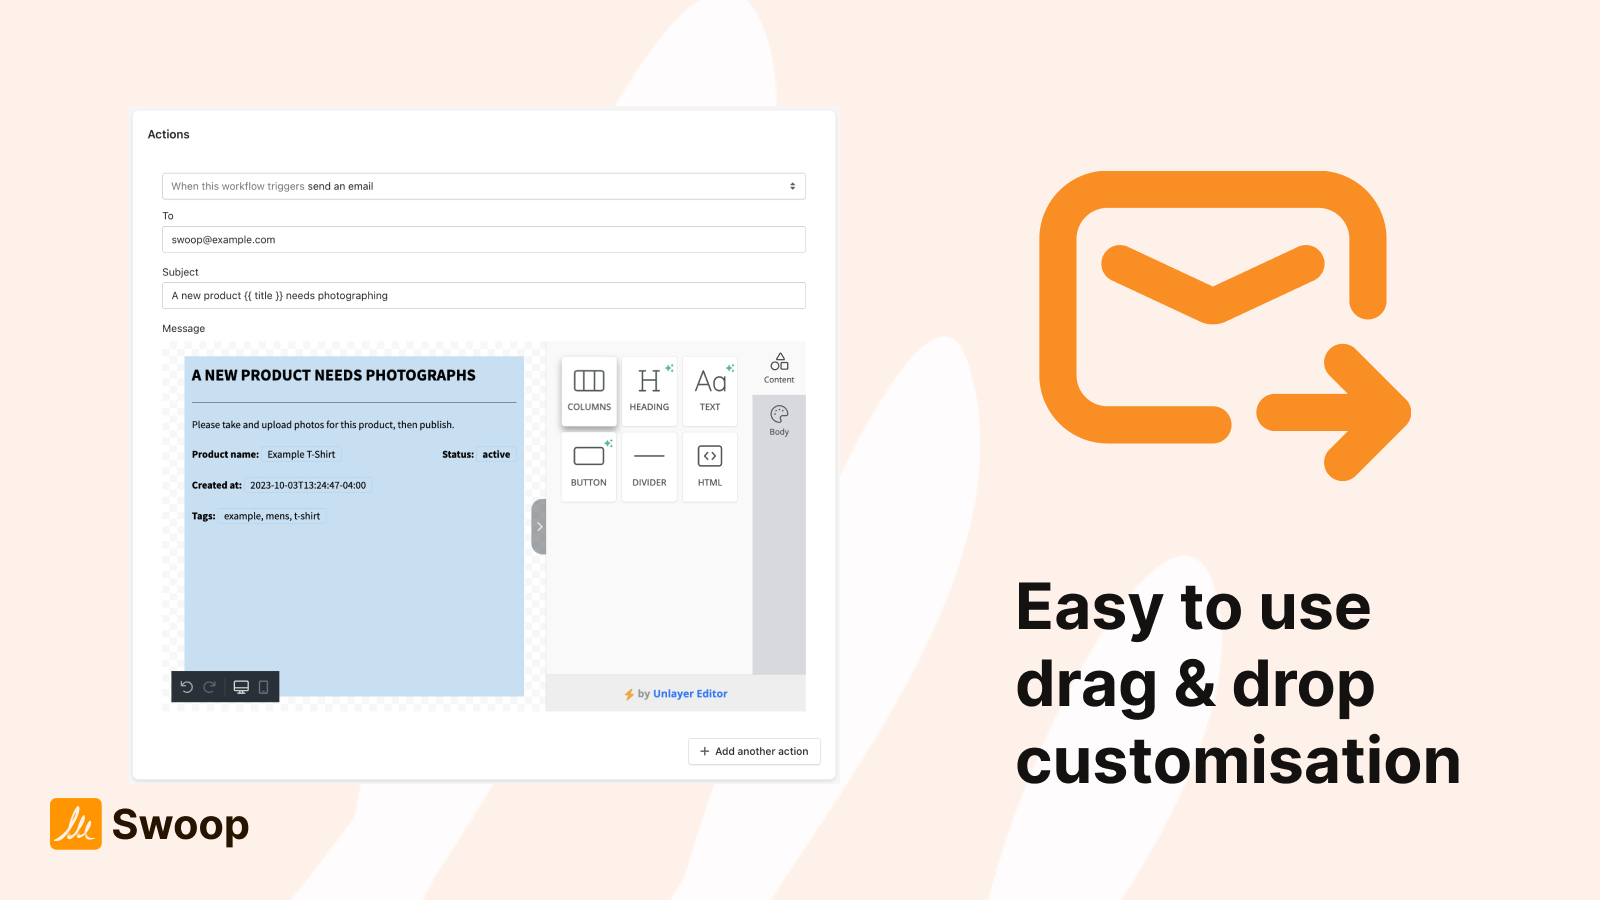 Easy to use drag & drop customisation